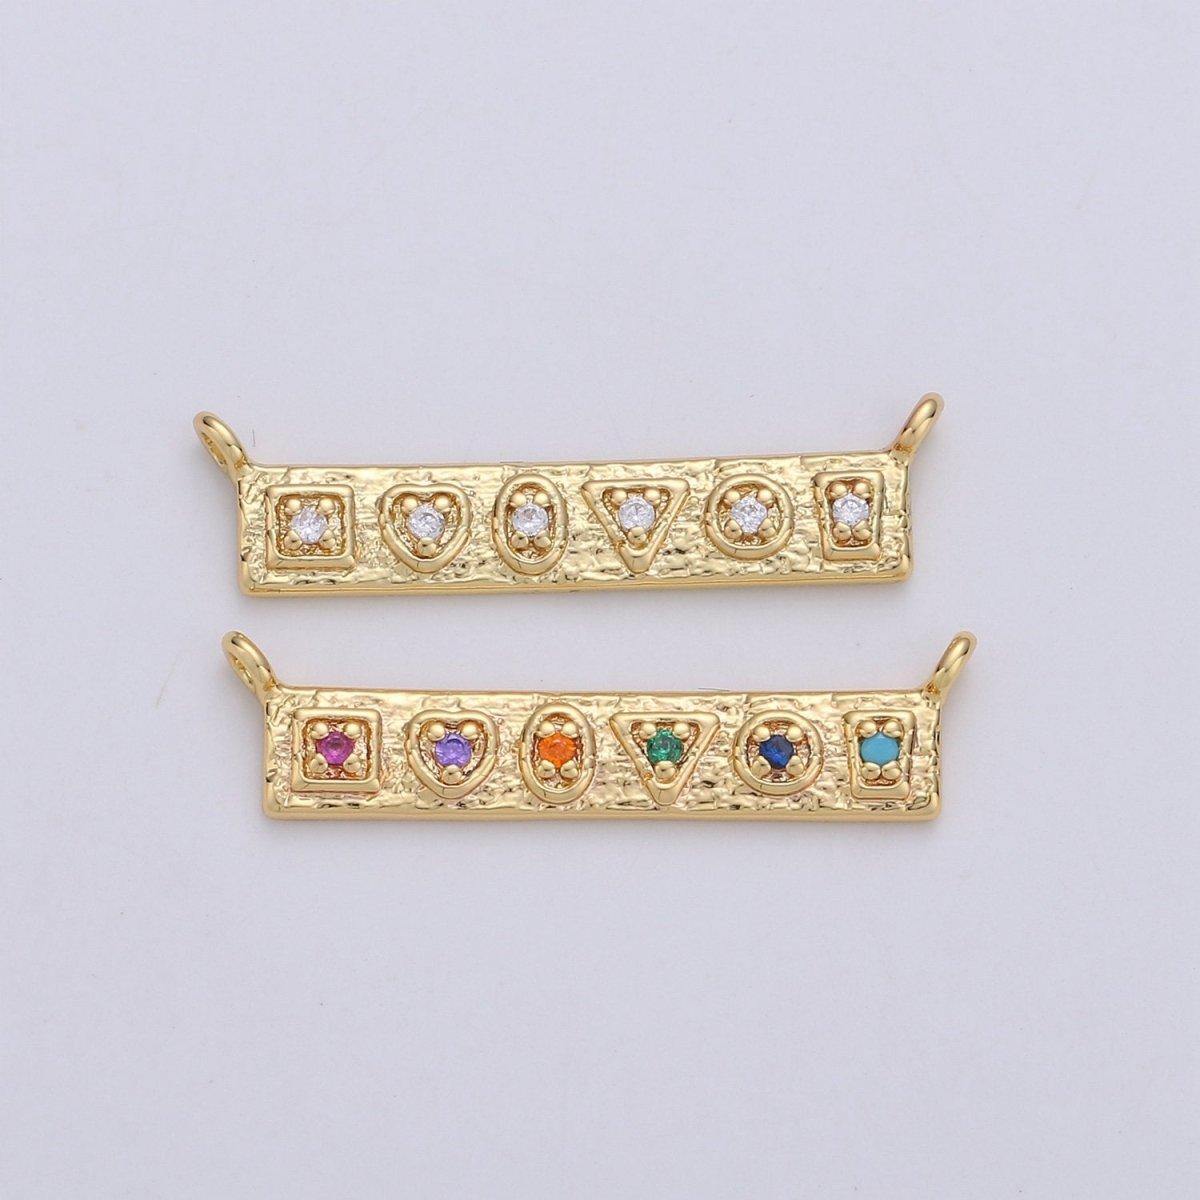 24K Gold Filled Rustic Geometric Shape Connector with Micro Pave Multi Color Cubic Charm double bail for Necklace or Bracelet F-358 F-359 - DLUXCA